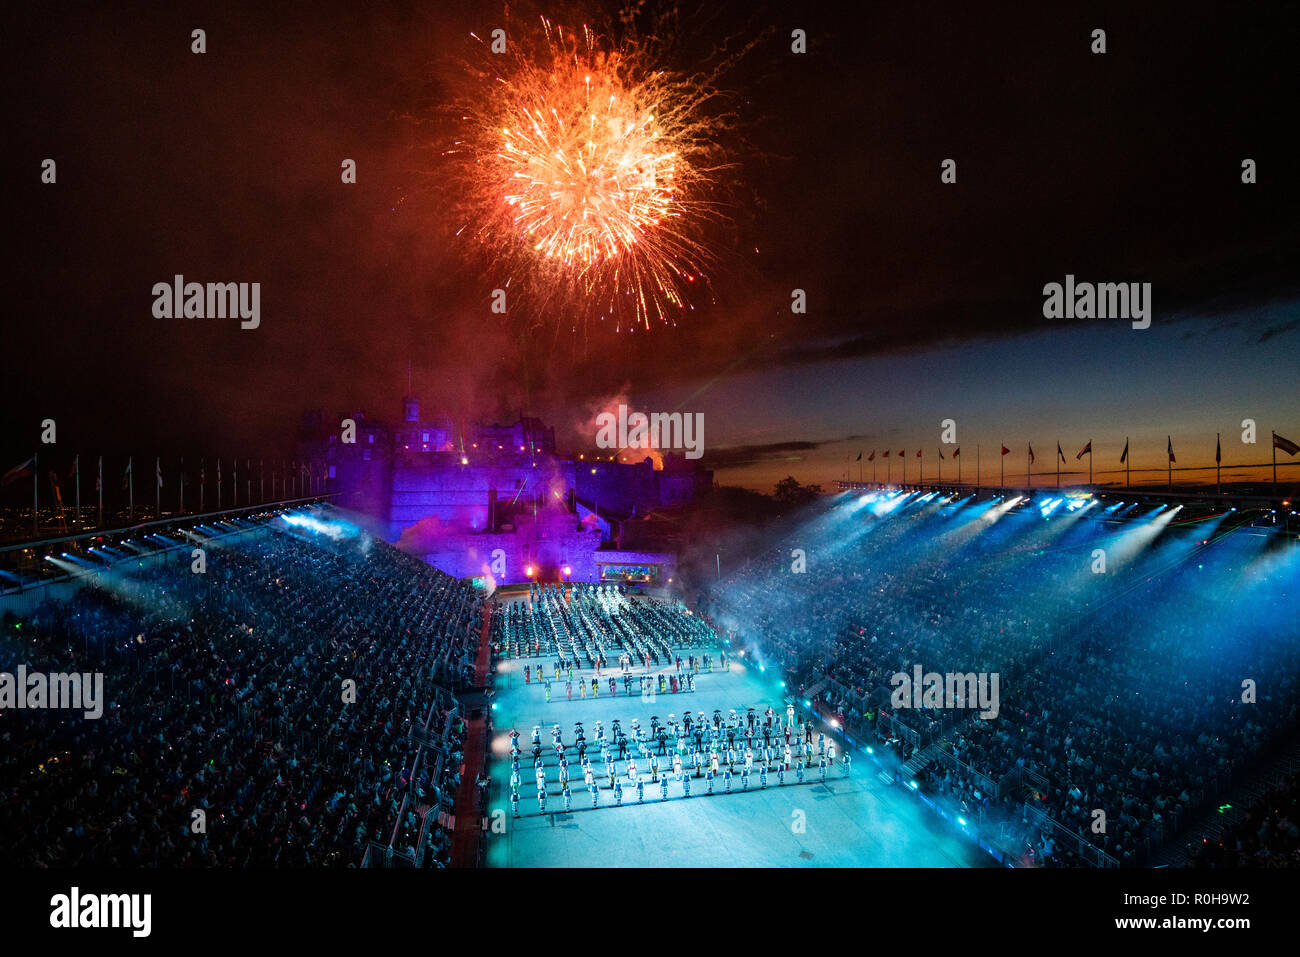 Fireworks explode in finale over the castle at the Edinburgh International Military Tattoo part of Edinburgh International Festival 2018 Stock Photo